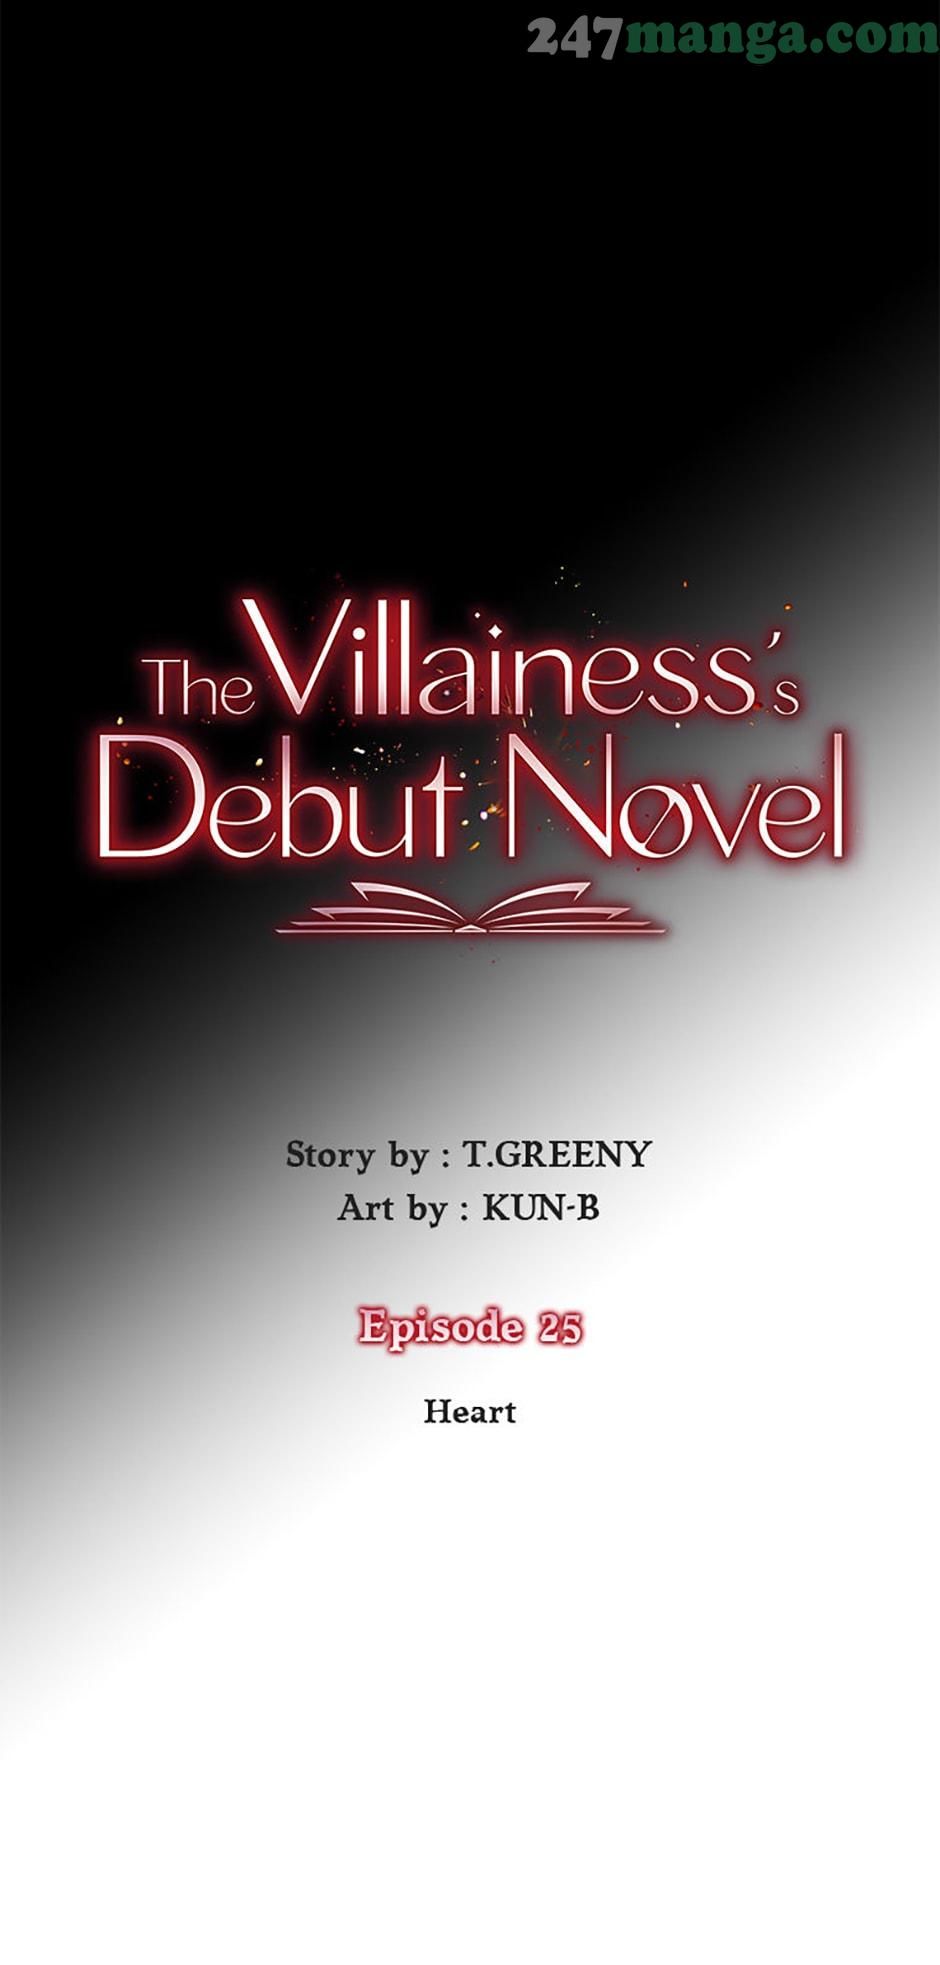 The Villainess’s Debut chapter 25